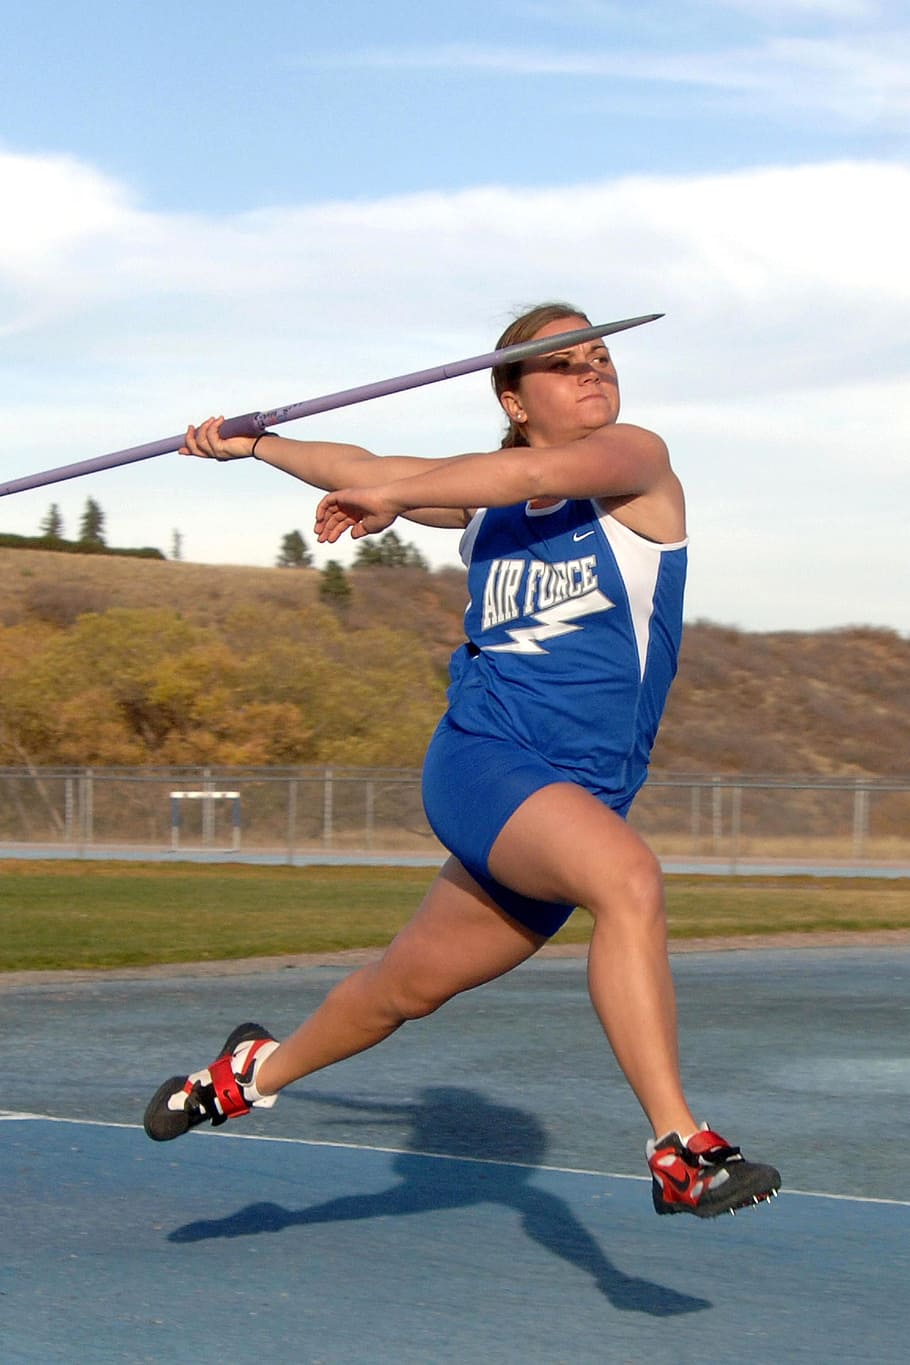 holding, metal spear, throw, running, Track And Field, Javelin, Woman, Female, throwing, training